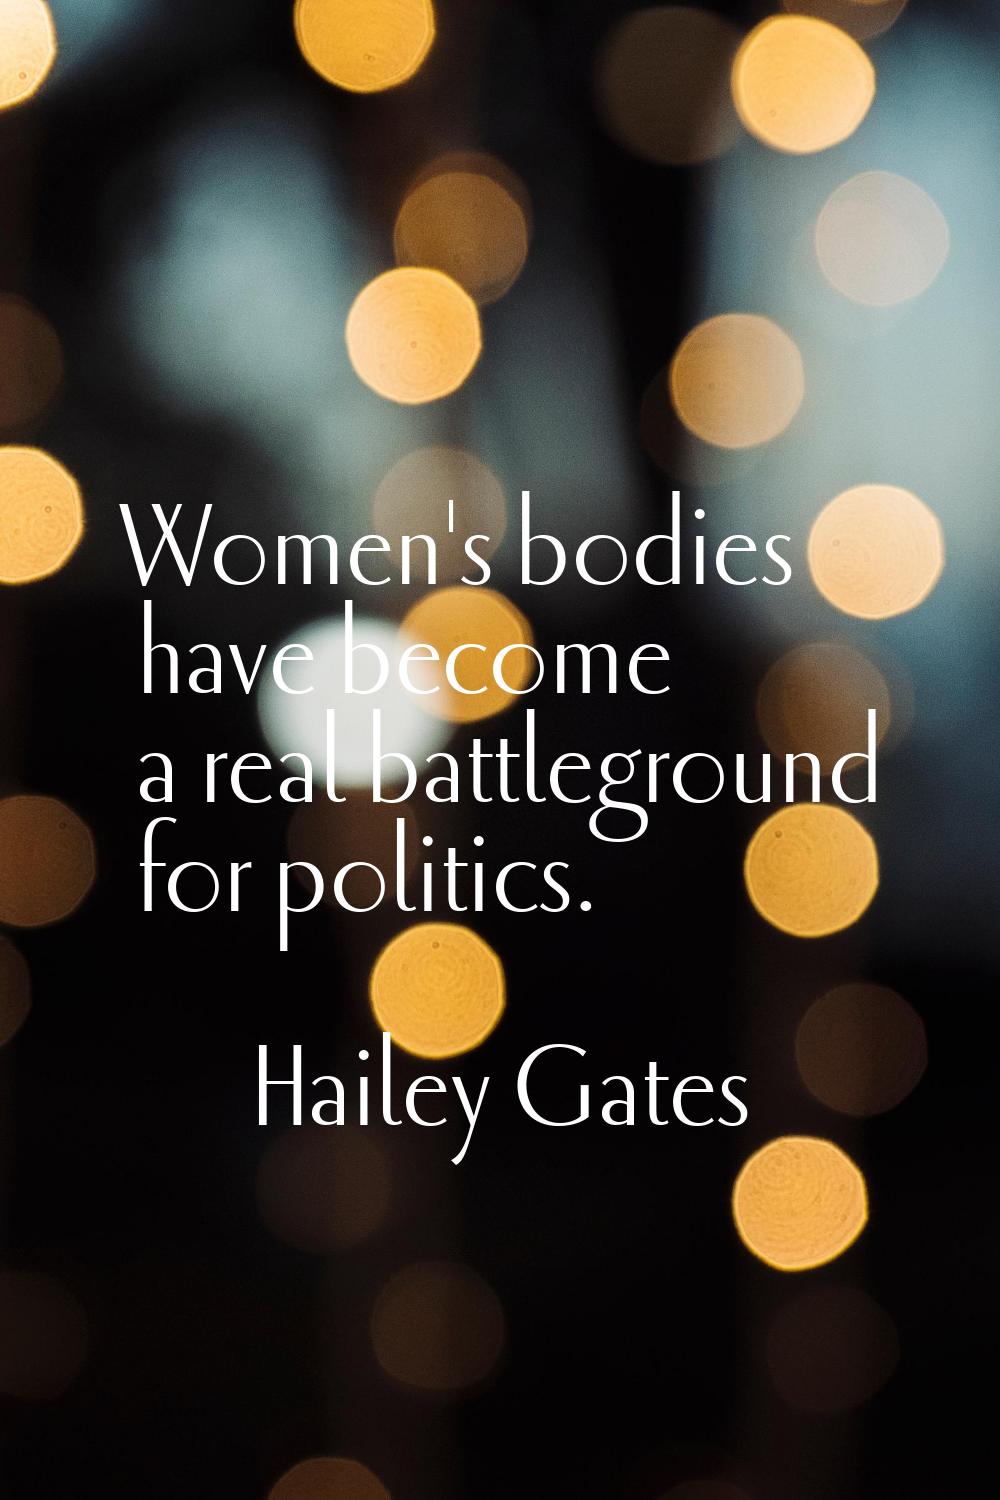 Women's bodies have become a real battleground for politics.